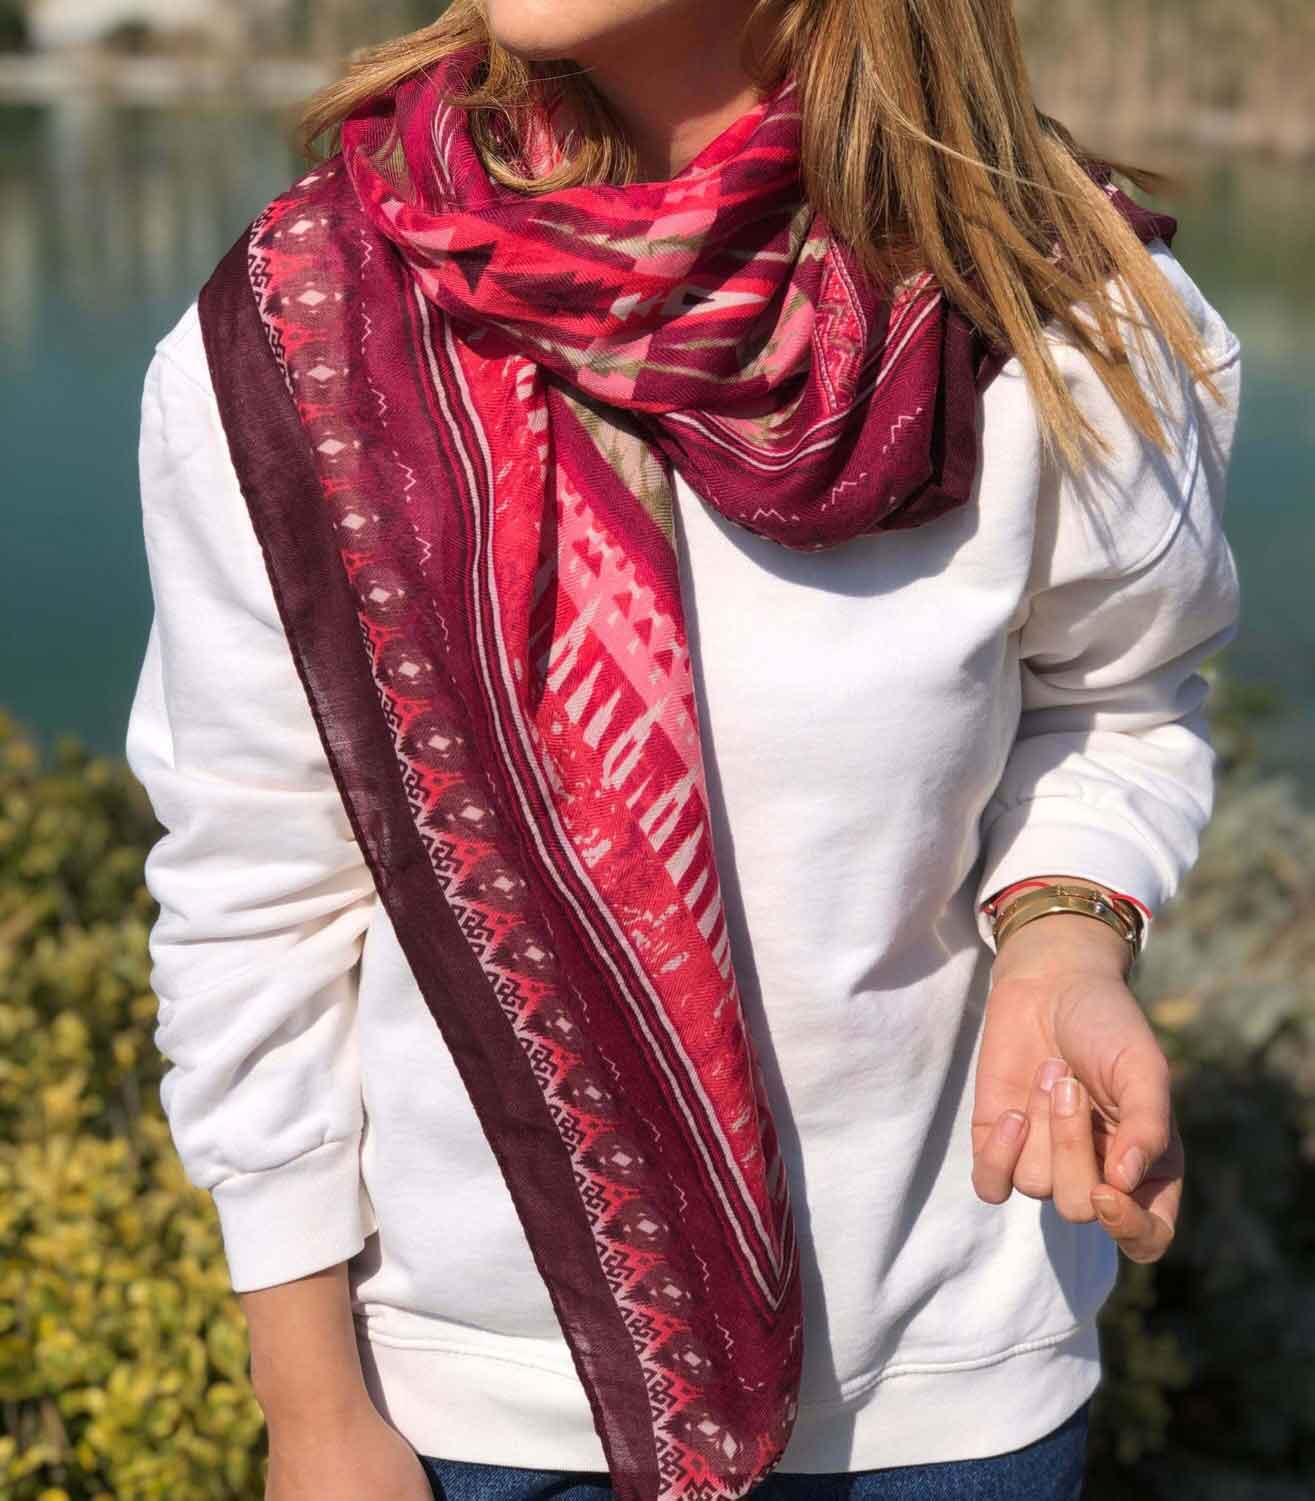 Cotton Large Square Black Scarf, Scarf for All Seasons, Best Gift for Woman, Pink and Burgundy Color Cotton Scarf with Burgundy Tassel